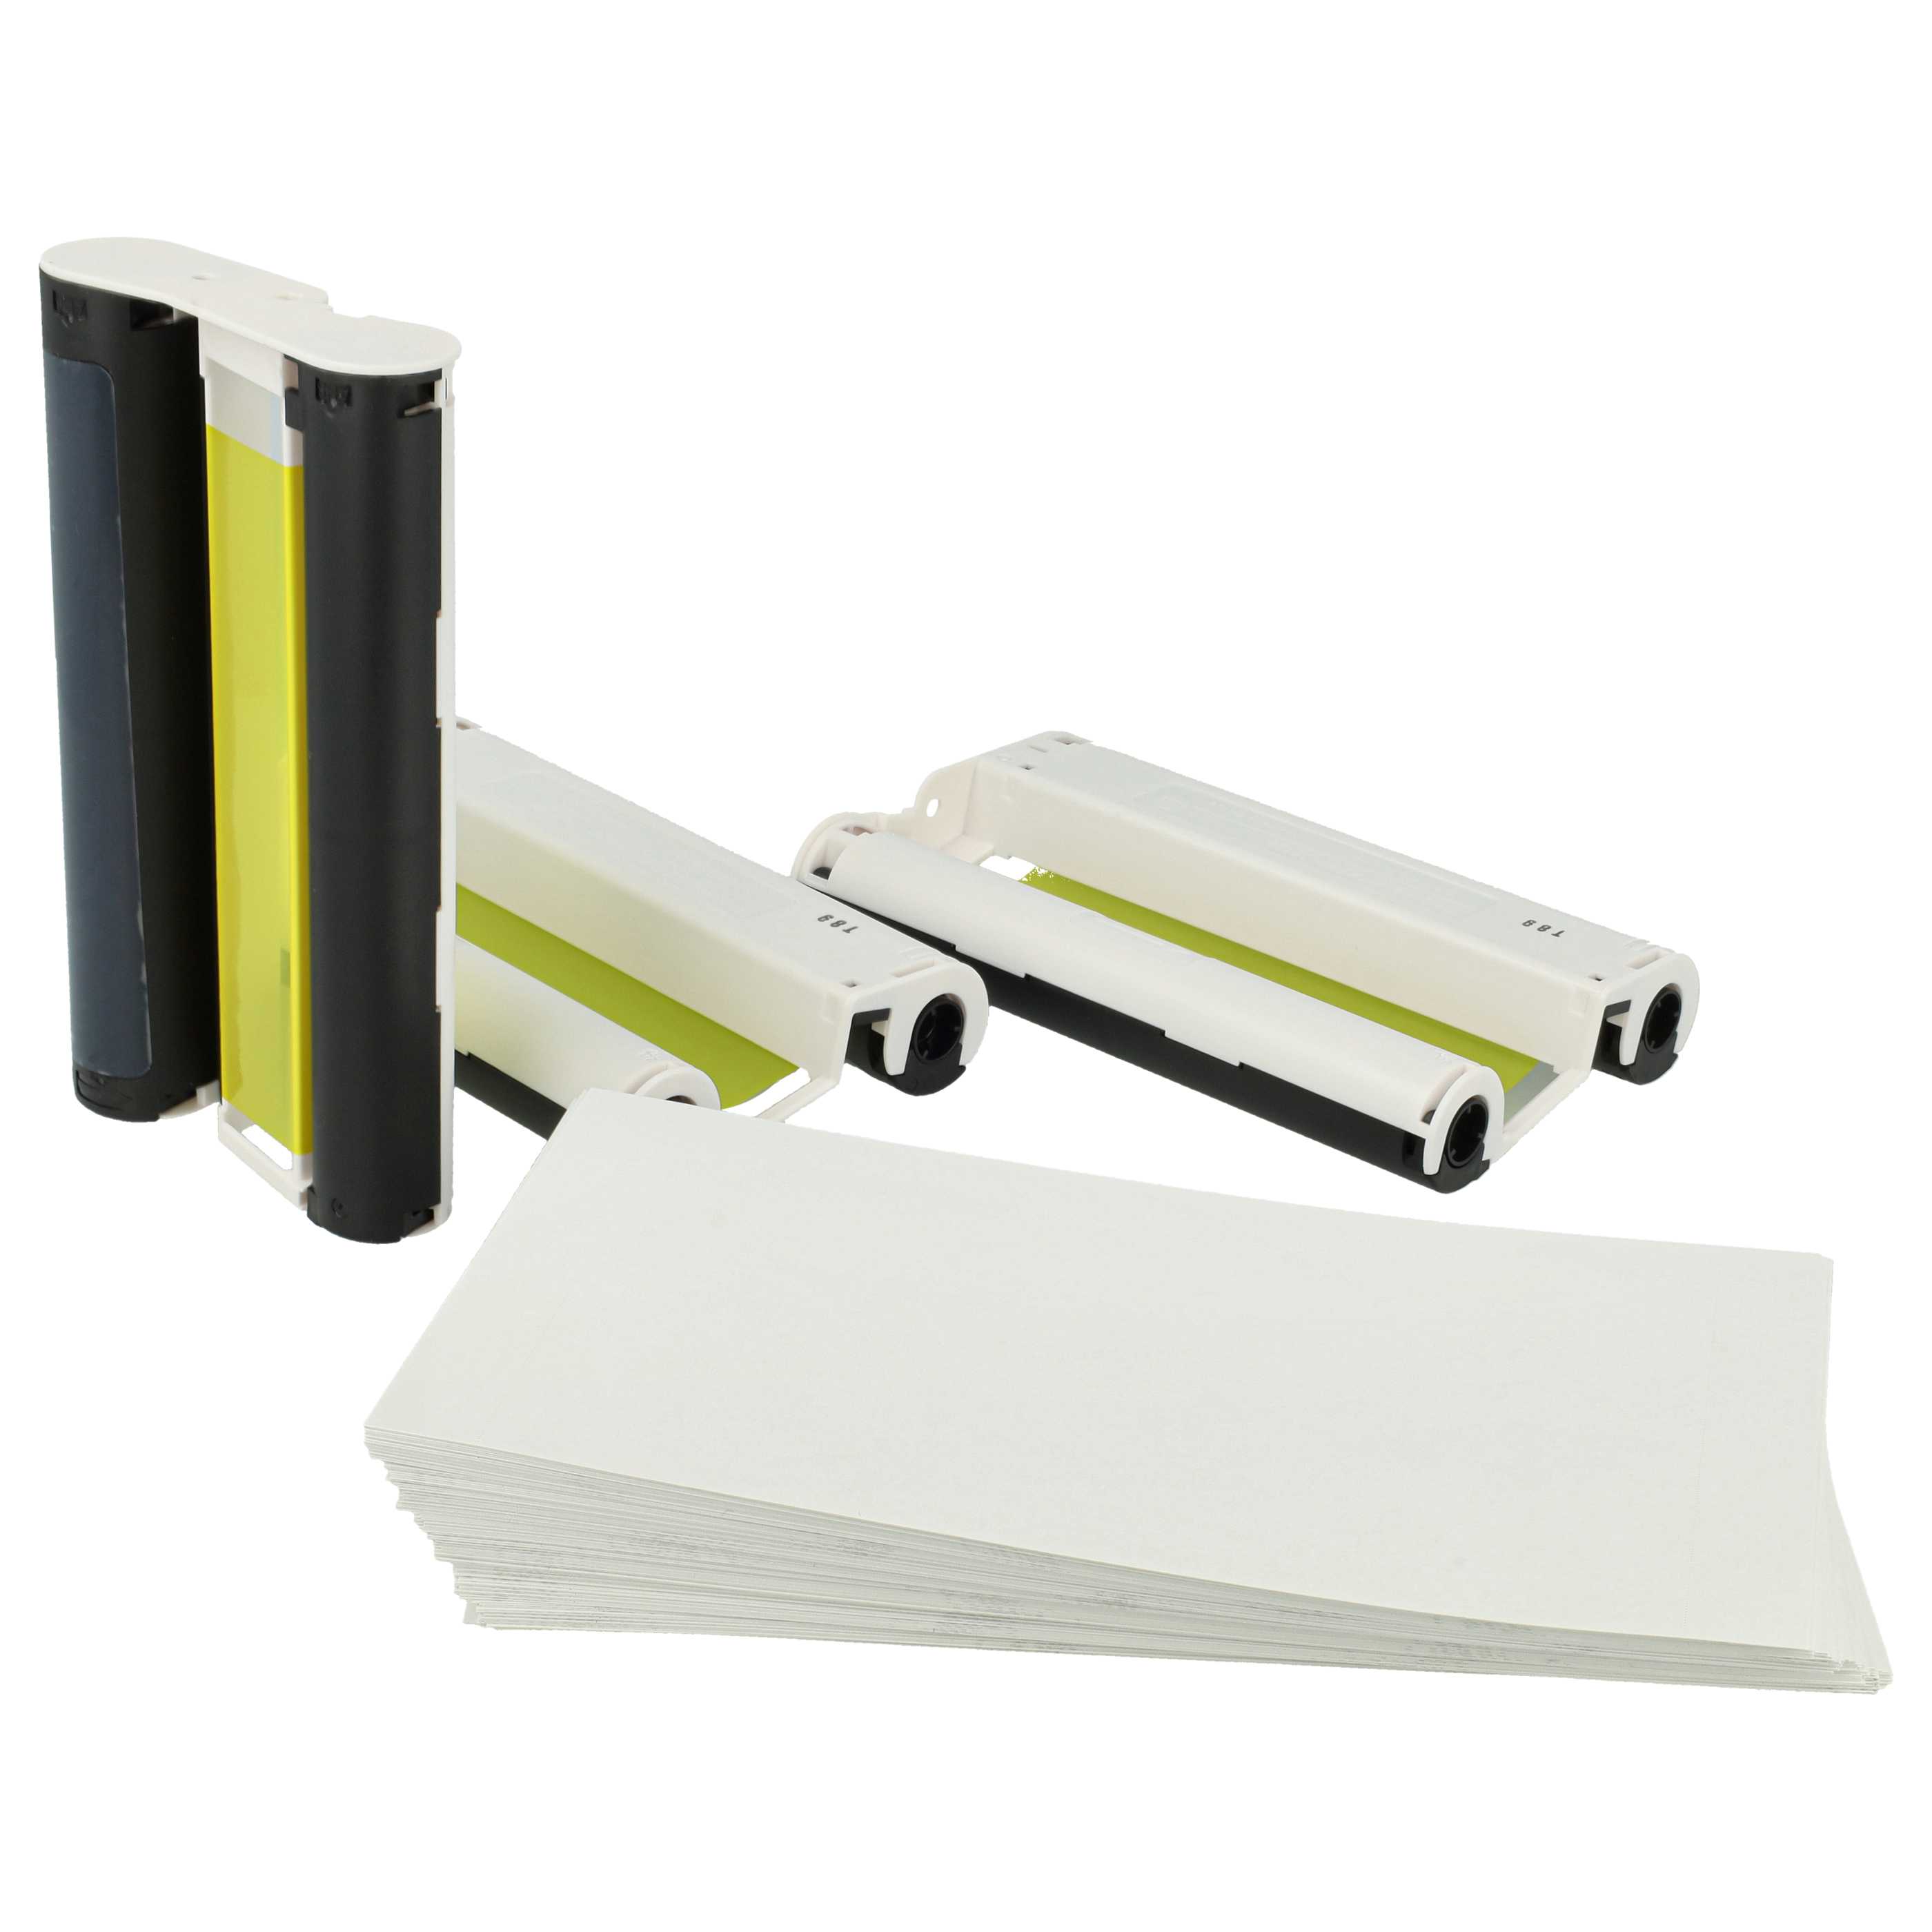 3x Cartridge replaces Canon 3115B001 for Canon Photo Printer - C/M/Y + 108x Photo Paper Sheet